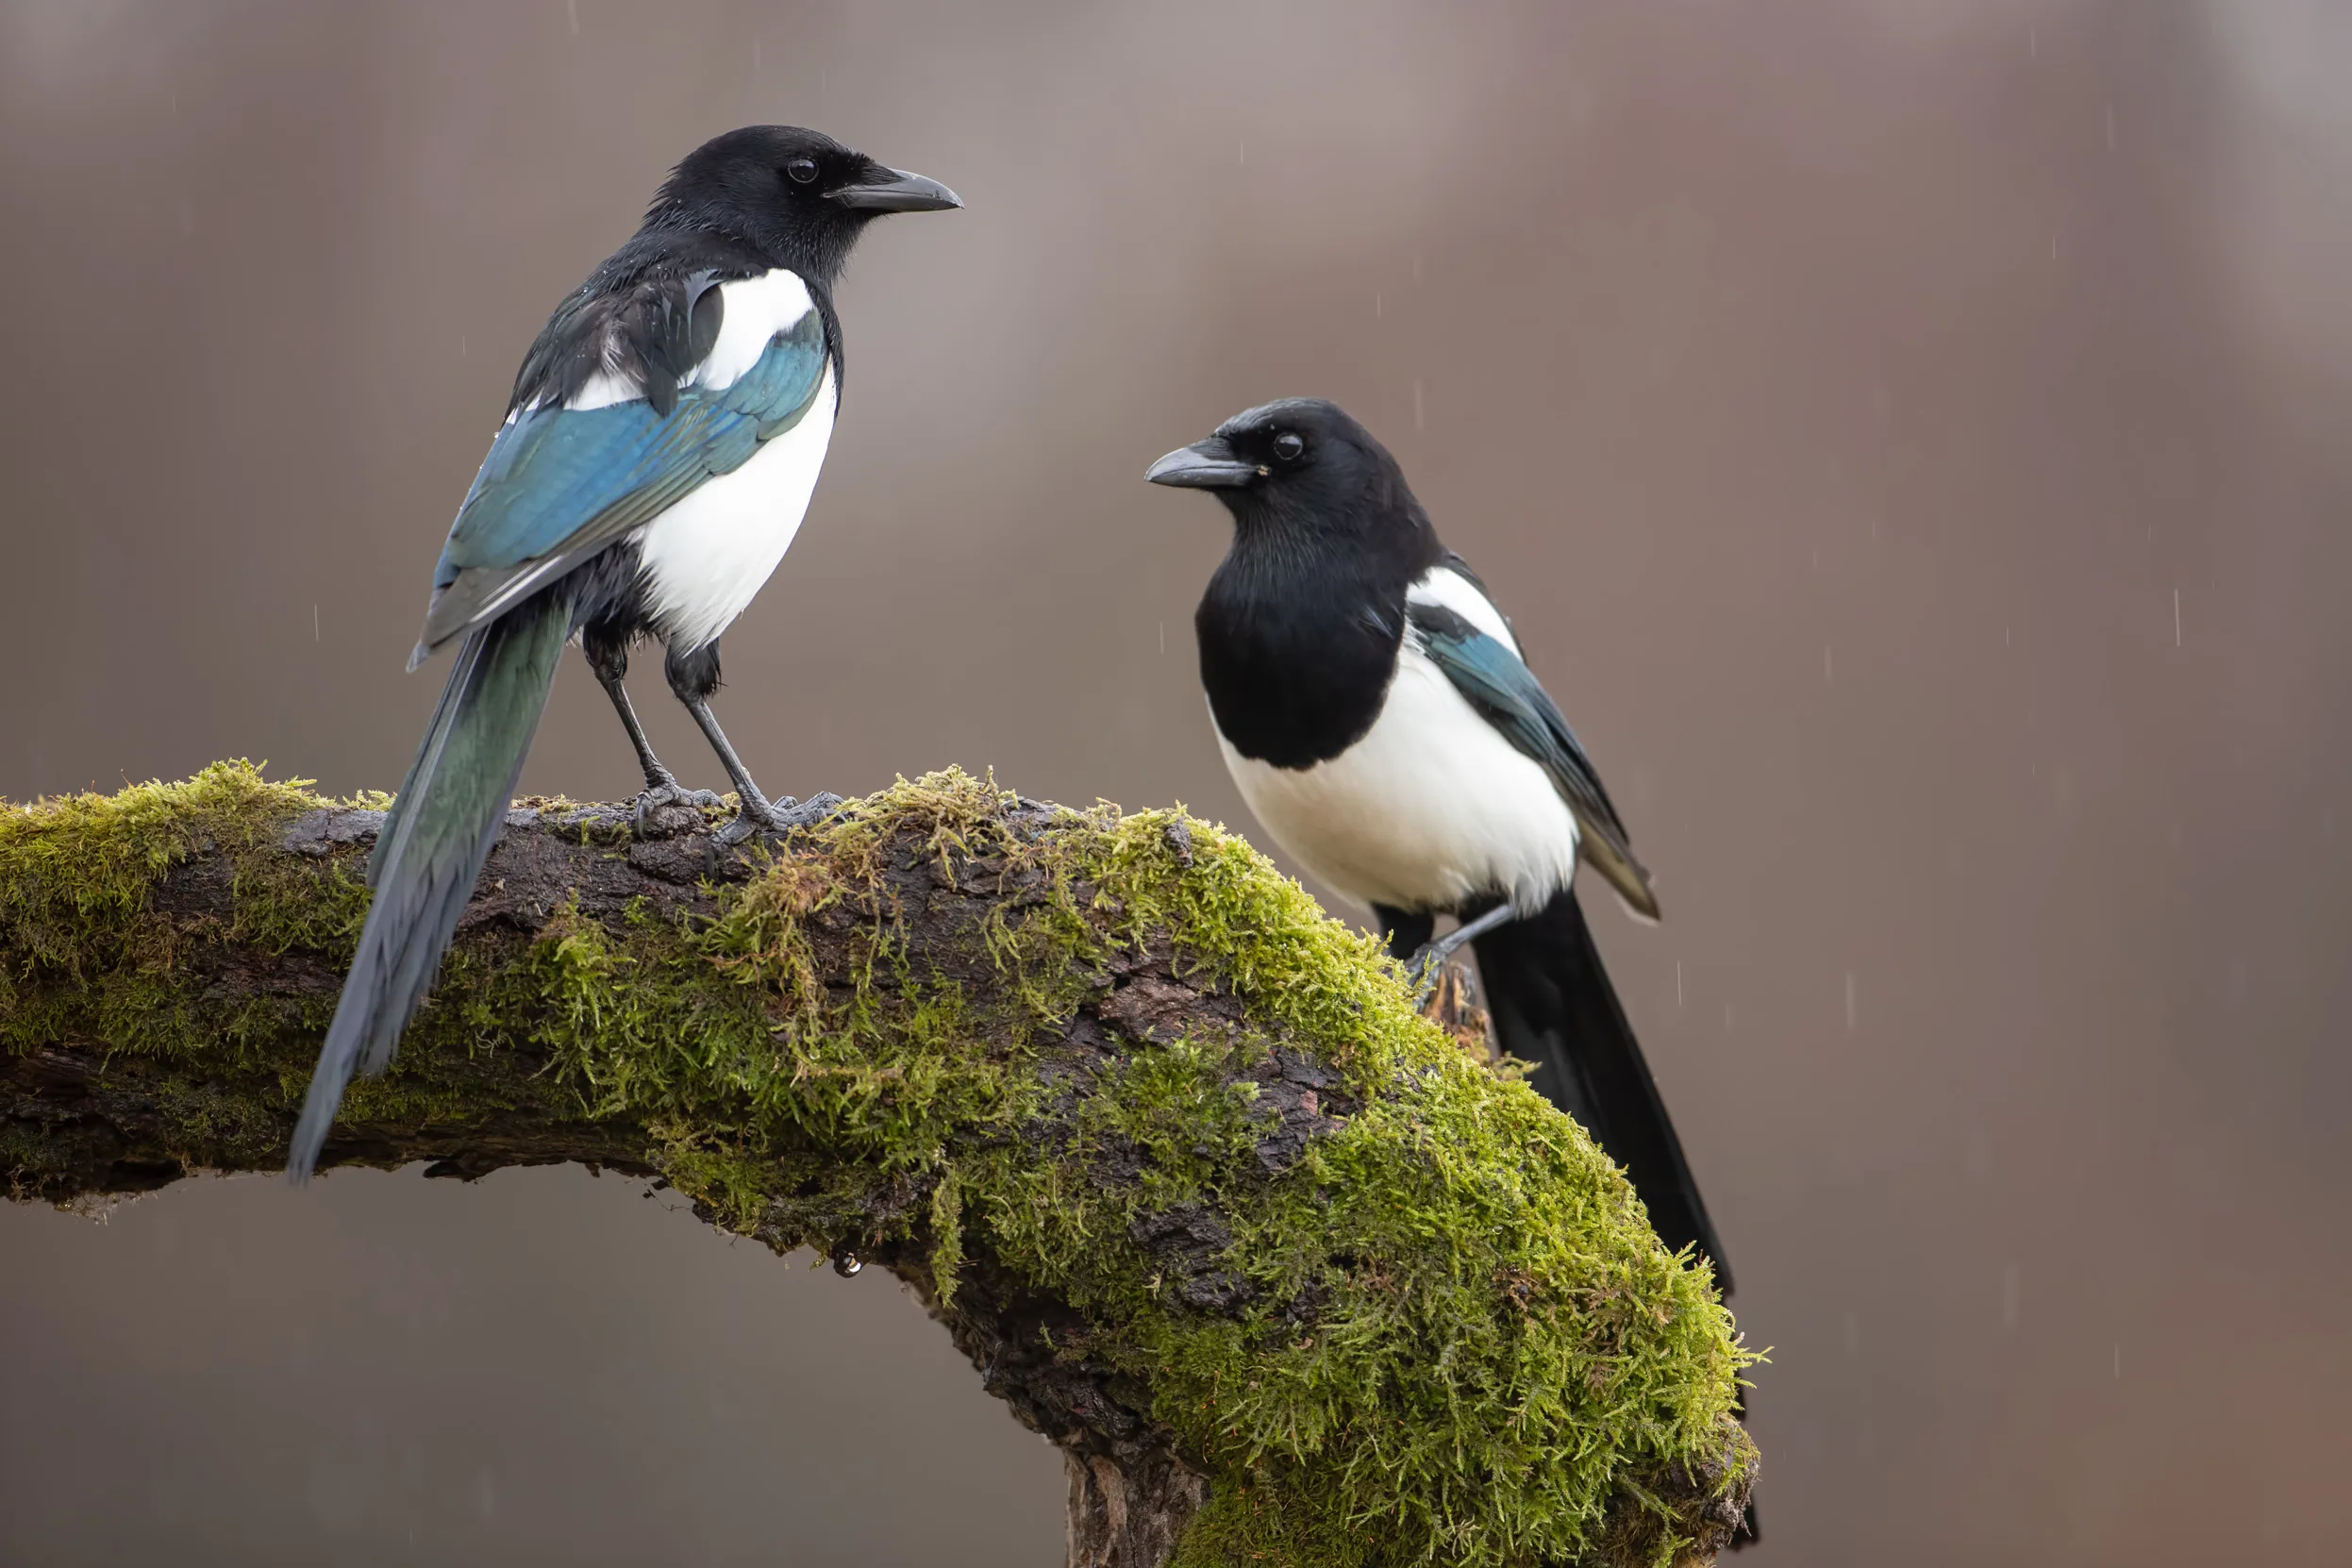 A pair of Magpies perched on a moss covered log in the rain.